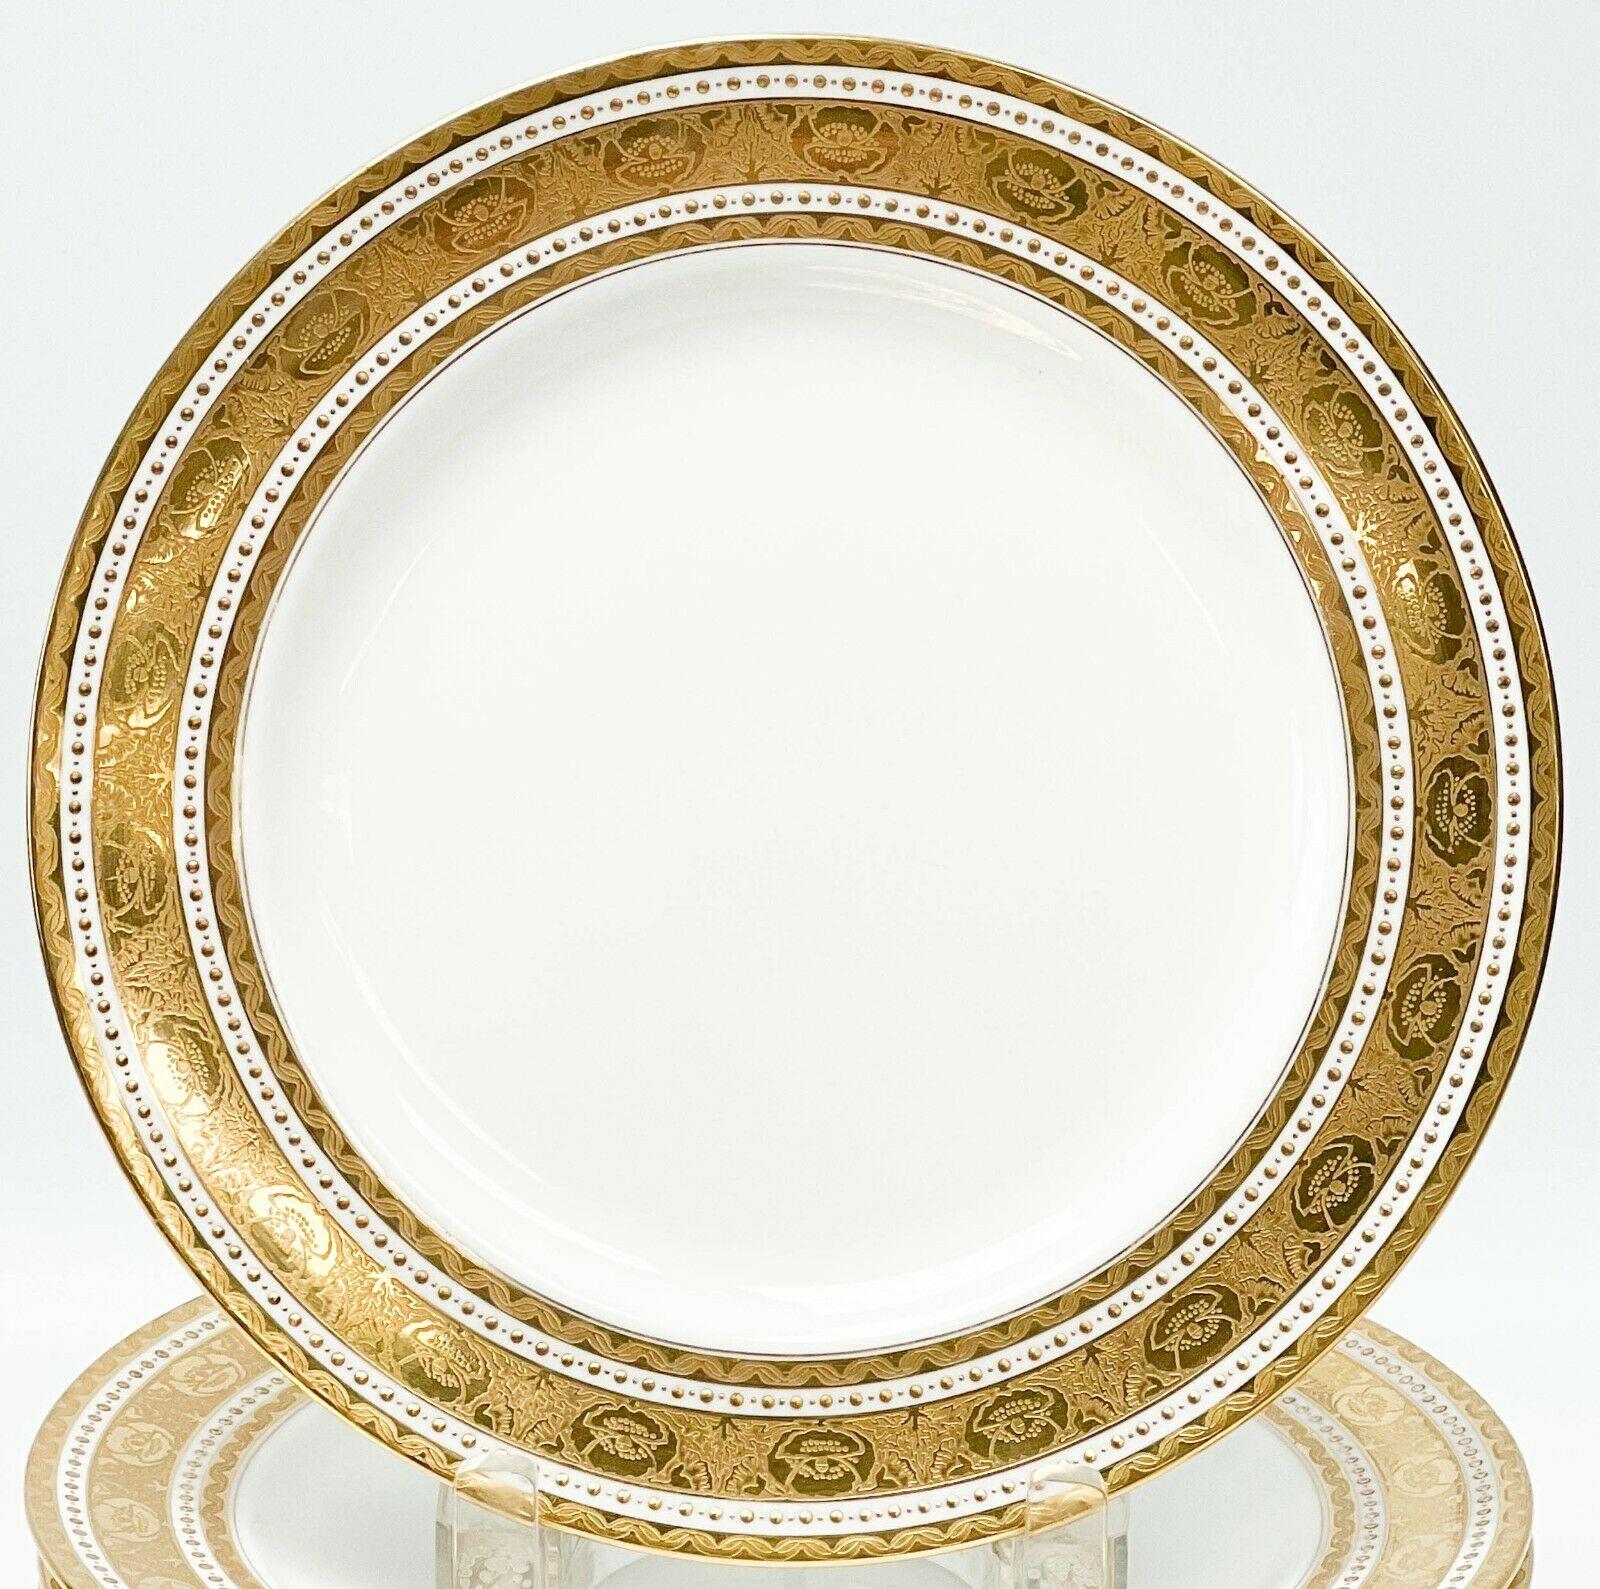 Set of 10 Minton England Gilt Porcelain 9 inch plates in H1417, 1910

A white ground to the center, ornate gilt decoration to the edge featuring florals and twisted ribbons. Bands of raised gilt dot decoration. Underside with Minton